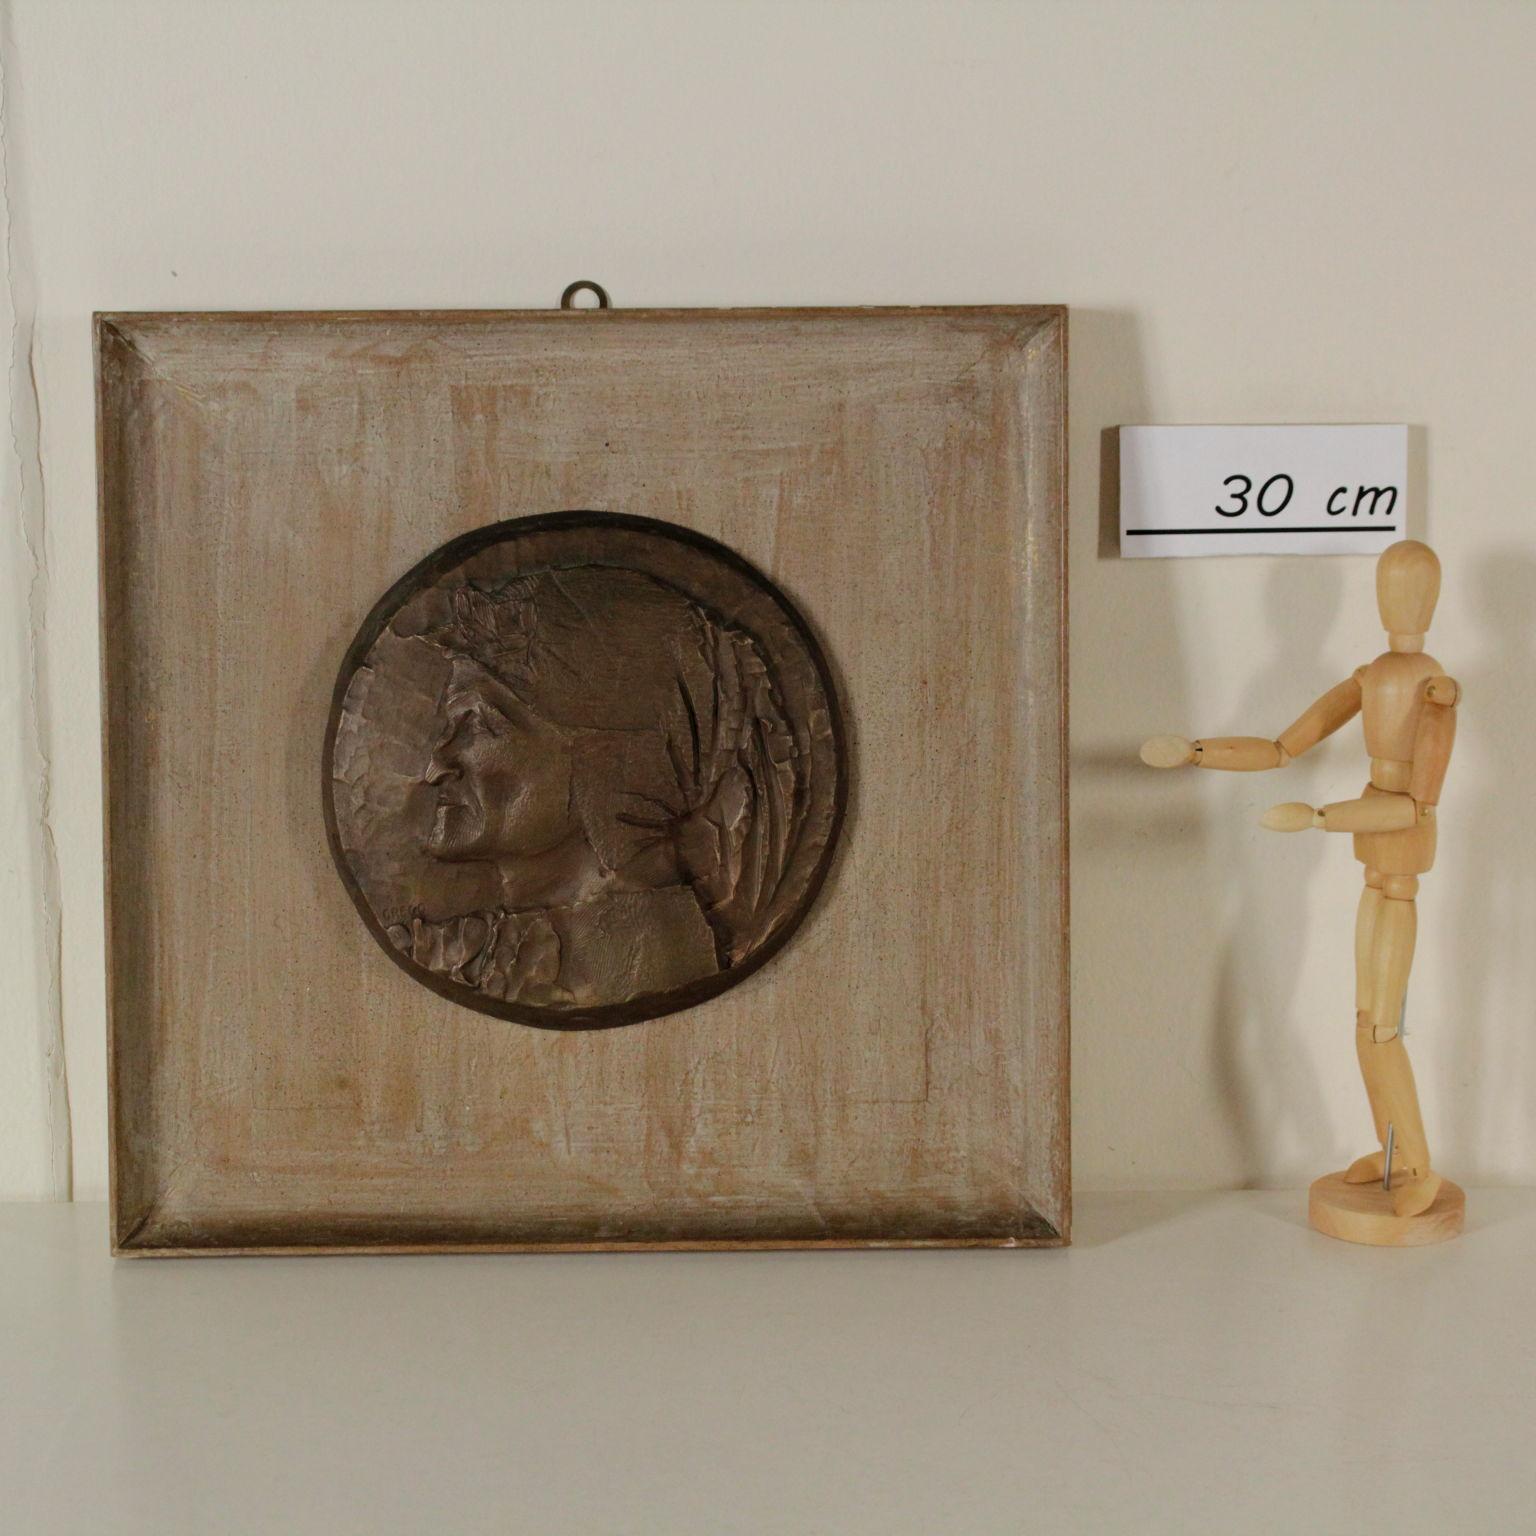 A bronze bas-relief made by Emilio Greco (1913-1995) depicting Dante Alighieri. Signed in the lower left corner. Accompanied by a catalogue article beloging to the 